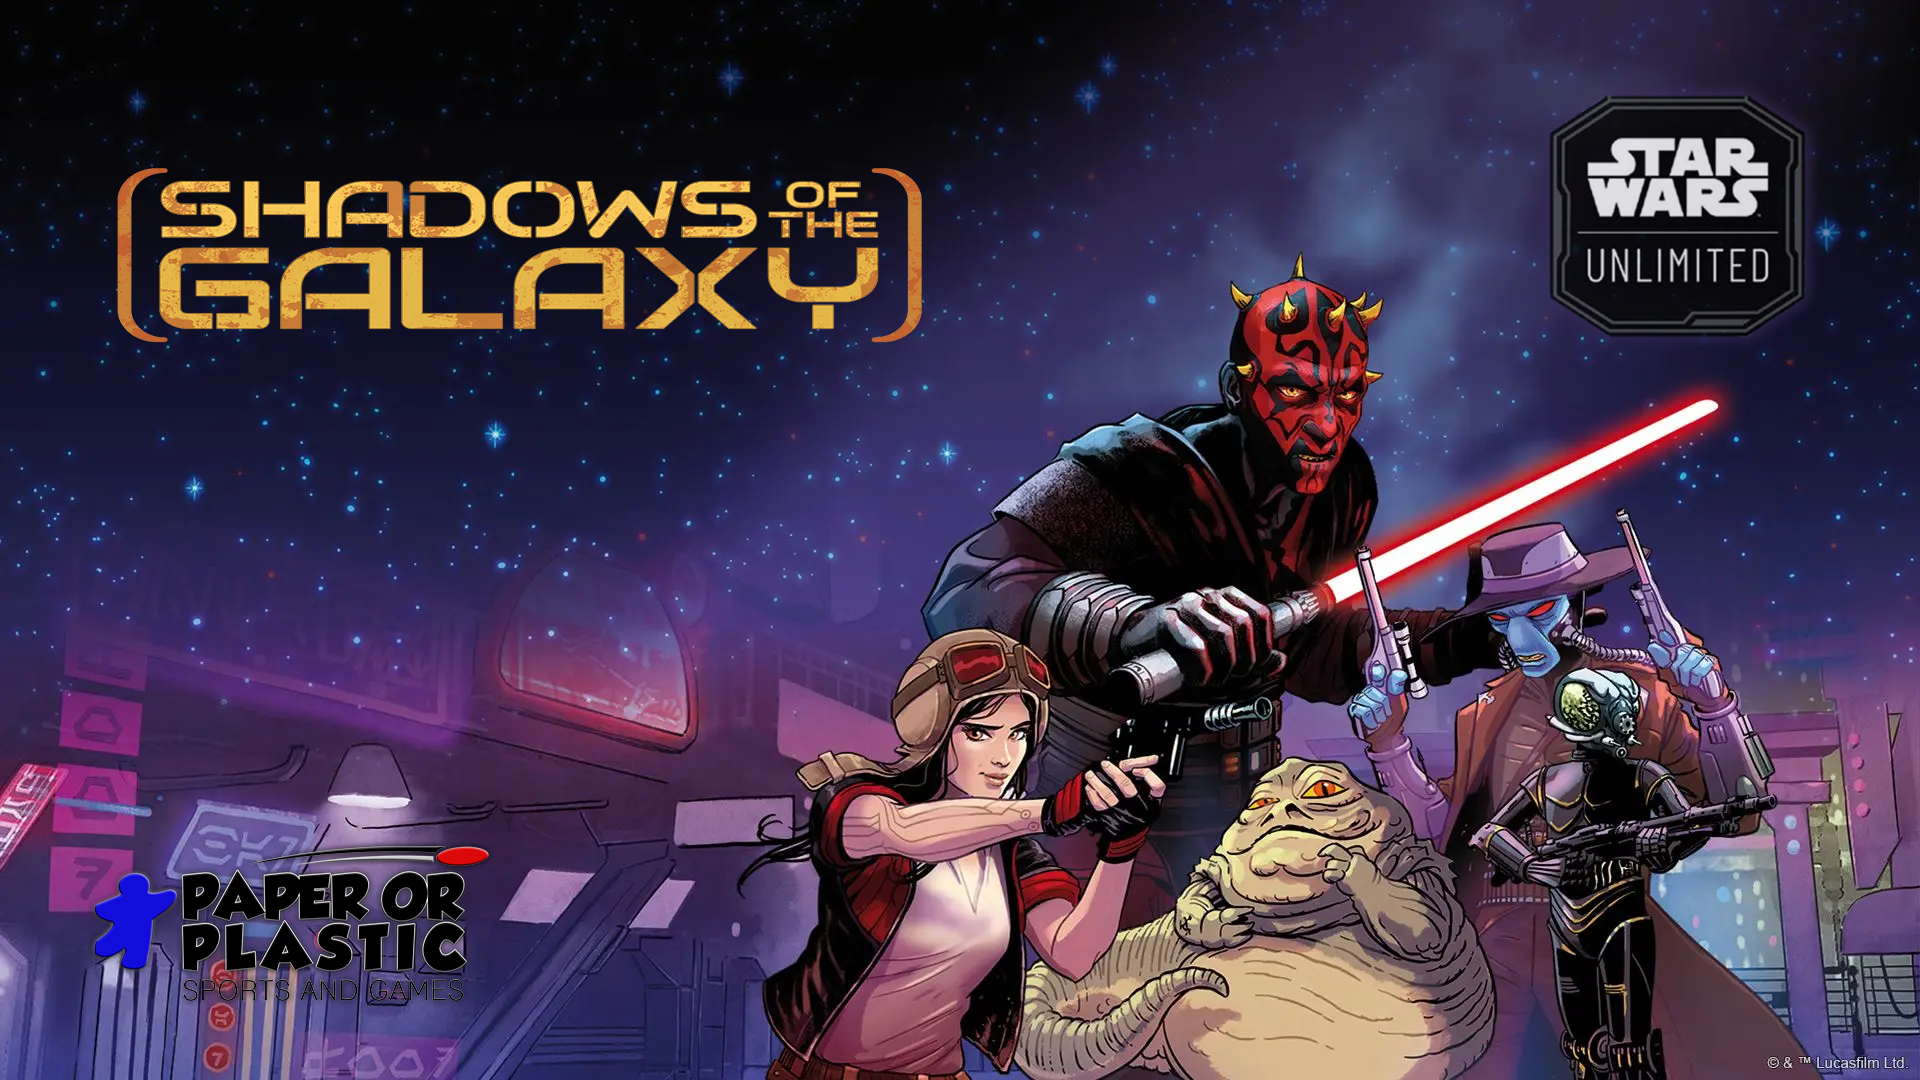 Star Wars Unlimited Shadows of the Galaxy